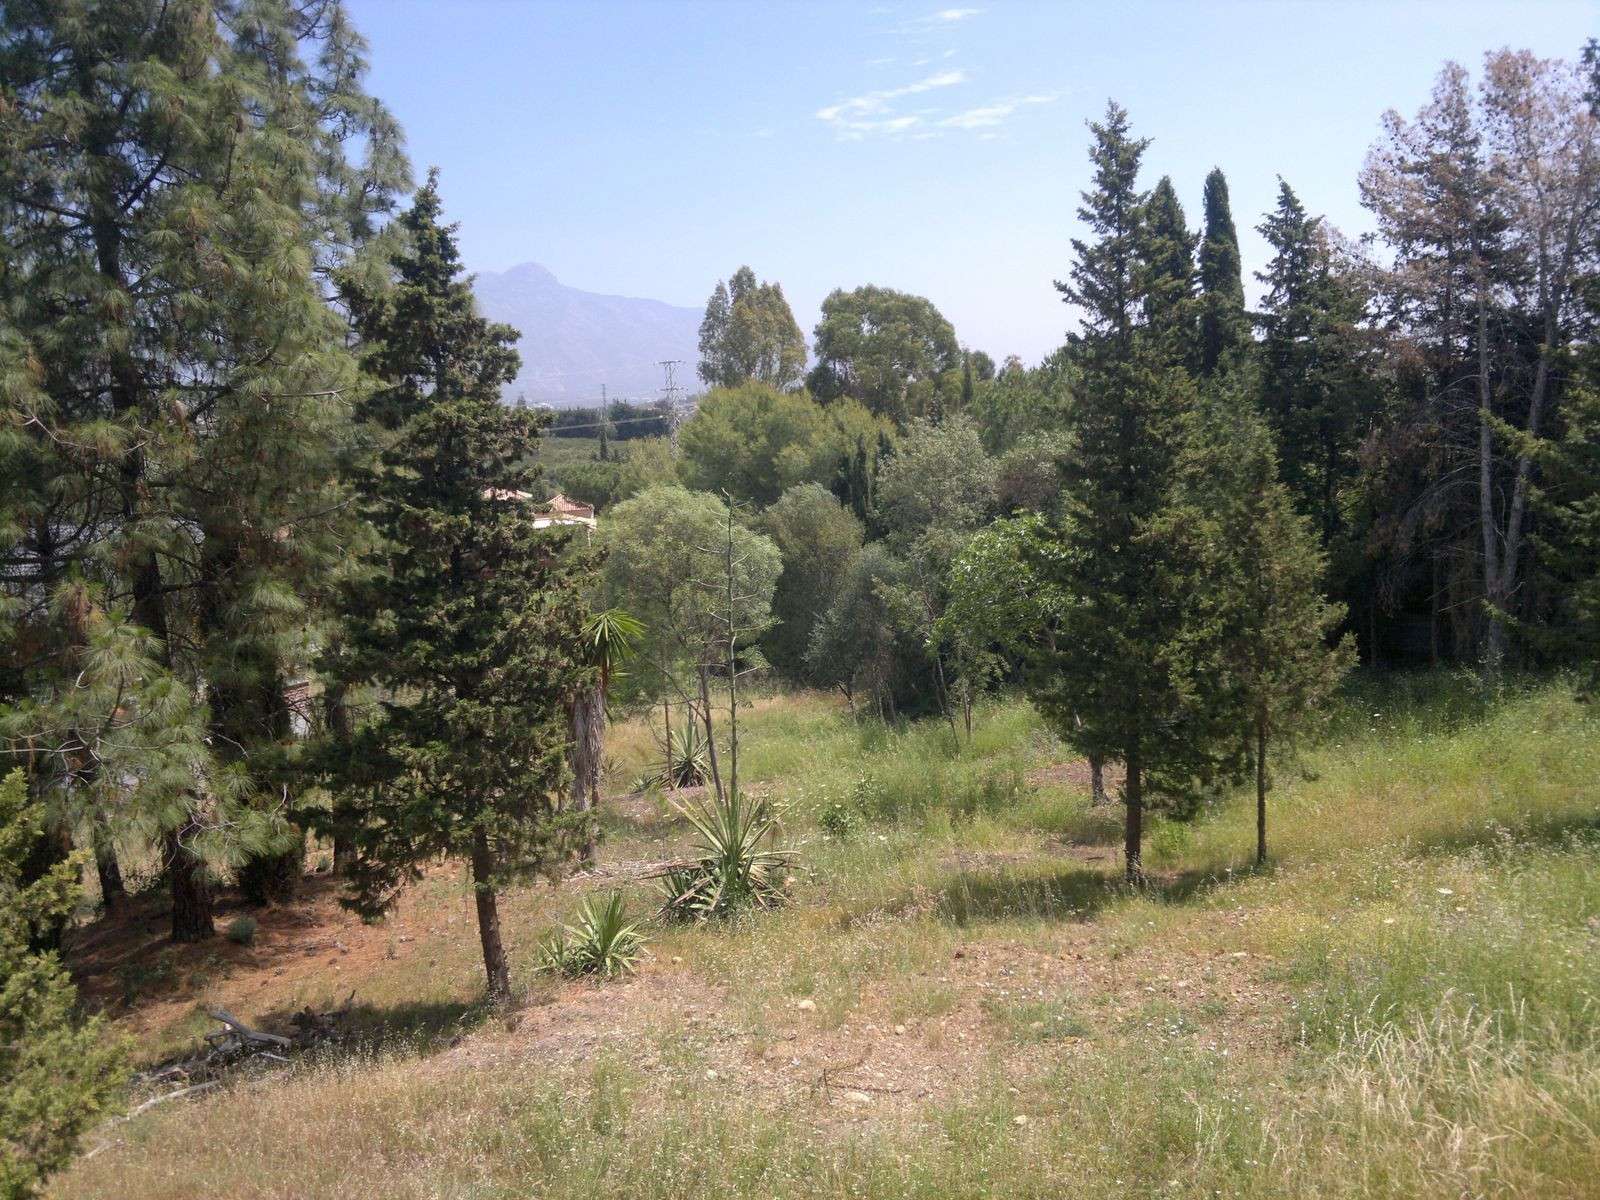 Countryhome for sale in Marbella - San Pedro and Guadalmina 1